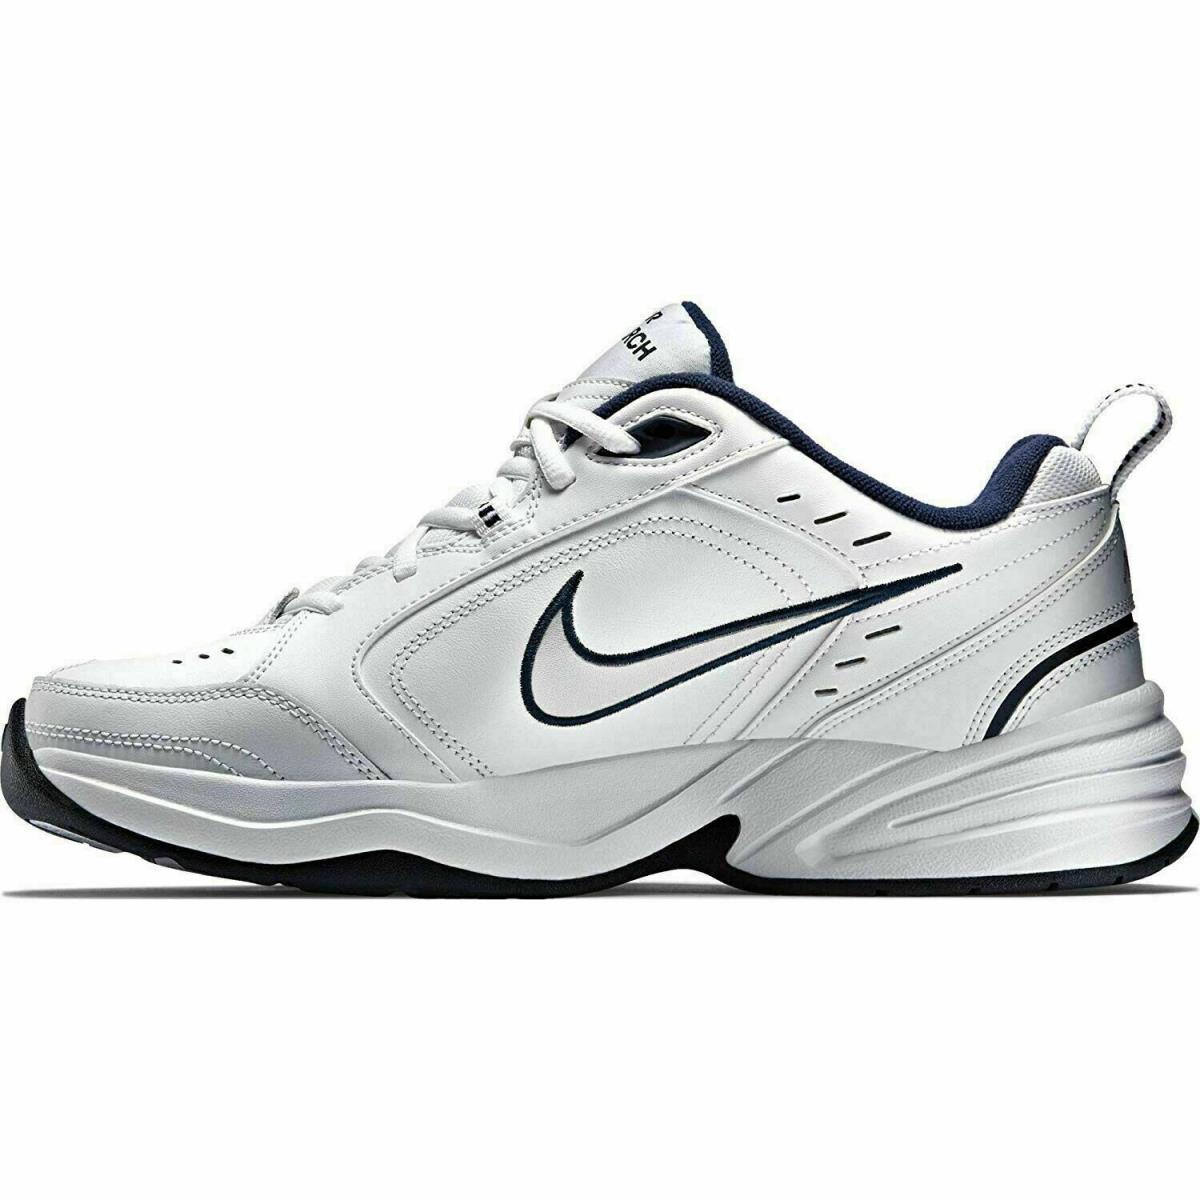 Nike Air Monarch IV White/metallic Silver/navy 415445 102 Men`s Shoes Med. Width